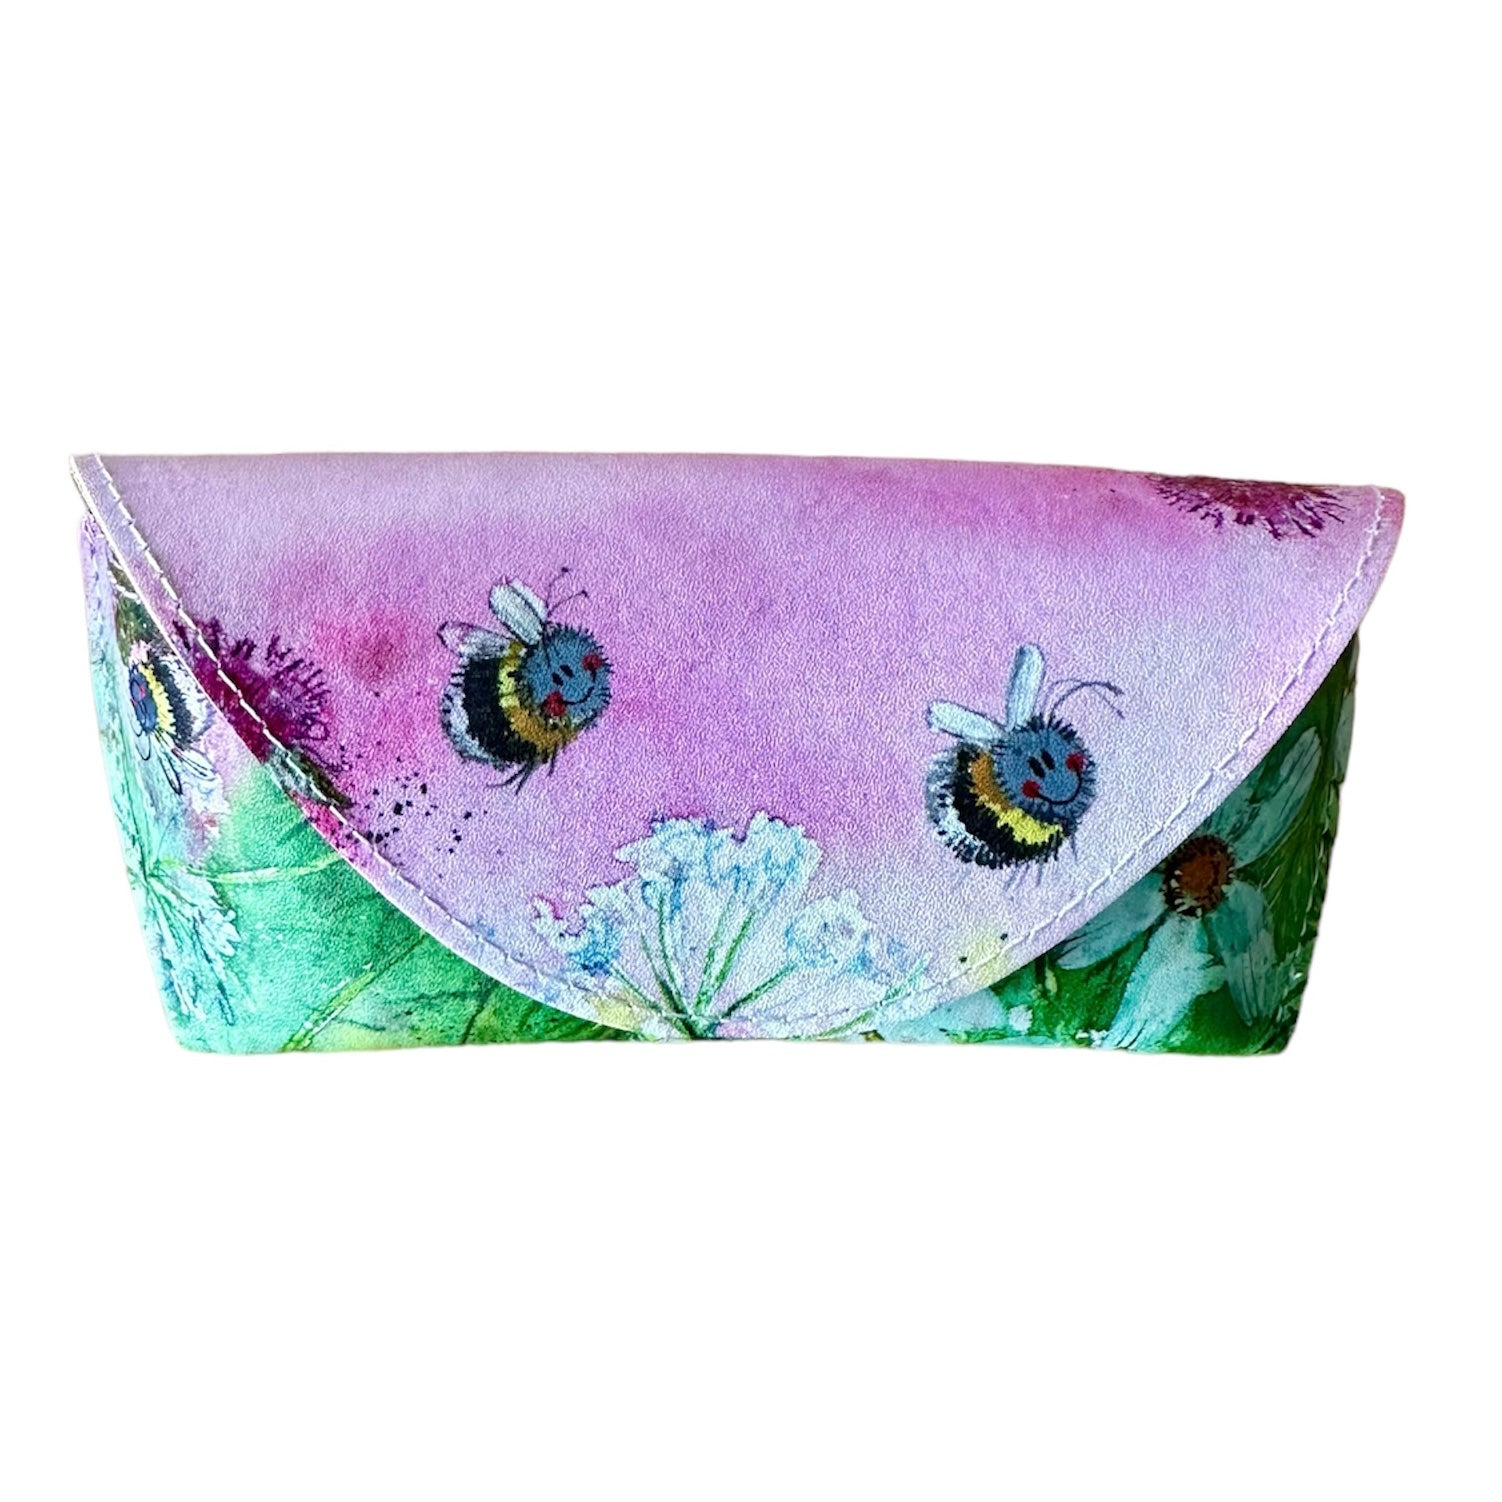 Alex Clark Glasses Case Decorated with Flowers & Bumble Bees